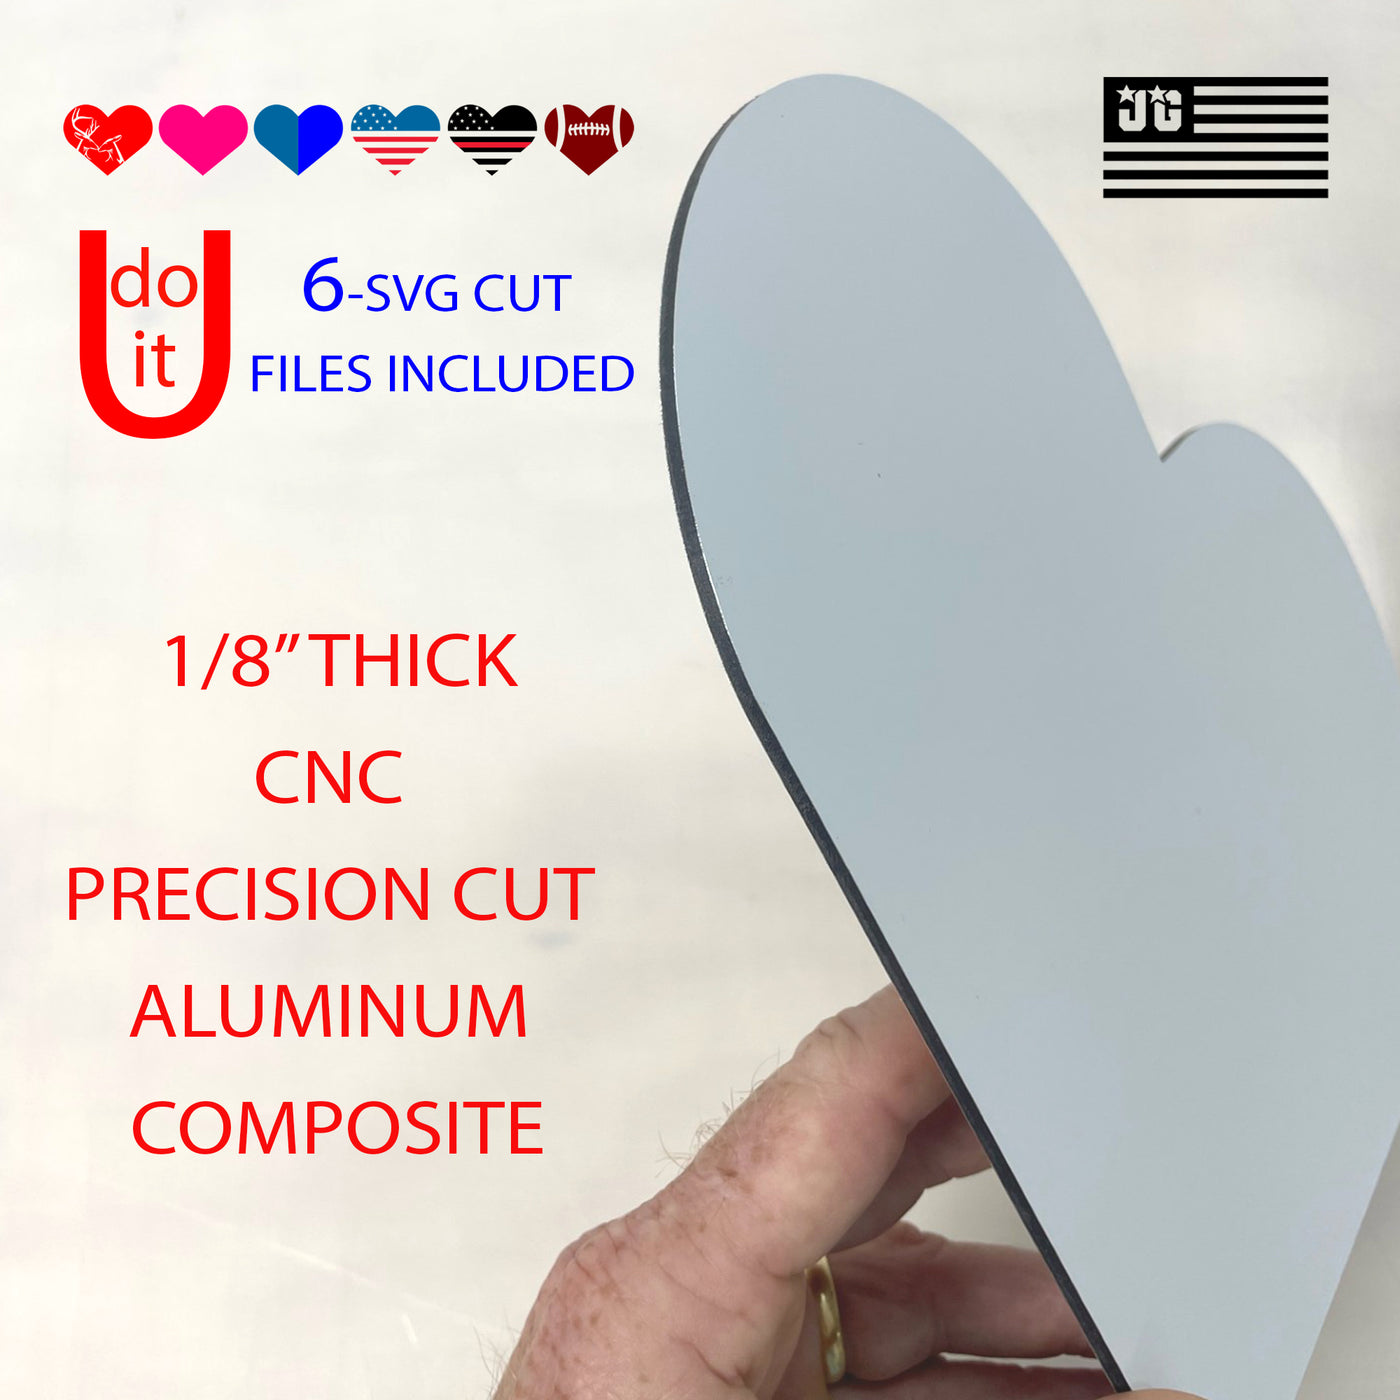 Customizable Heart SVG Bundle with Aluminum Heart Sign Blank & SVG Vinyl Cut File Included - Made in the USA for DIY, Crafters, Sign Making Bundle